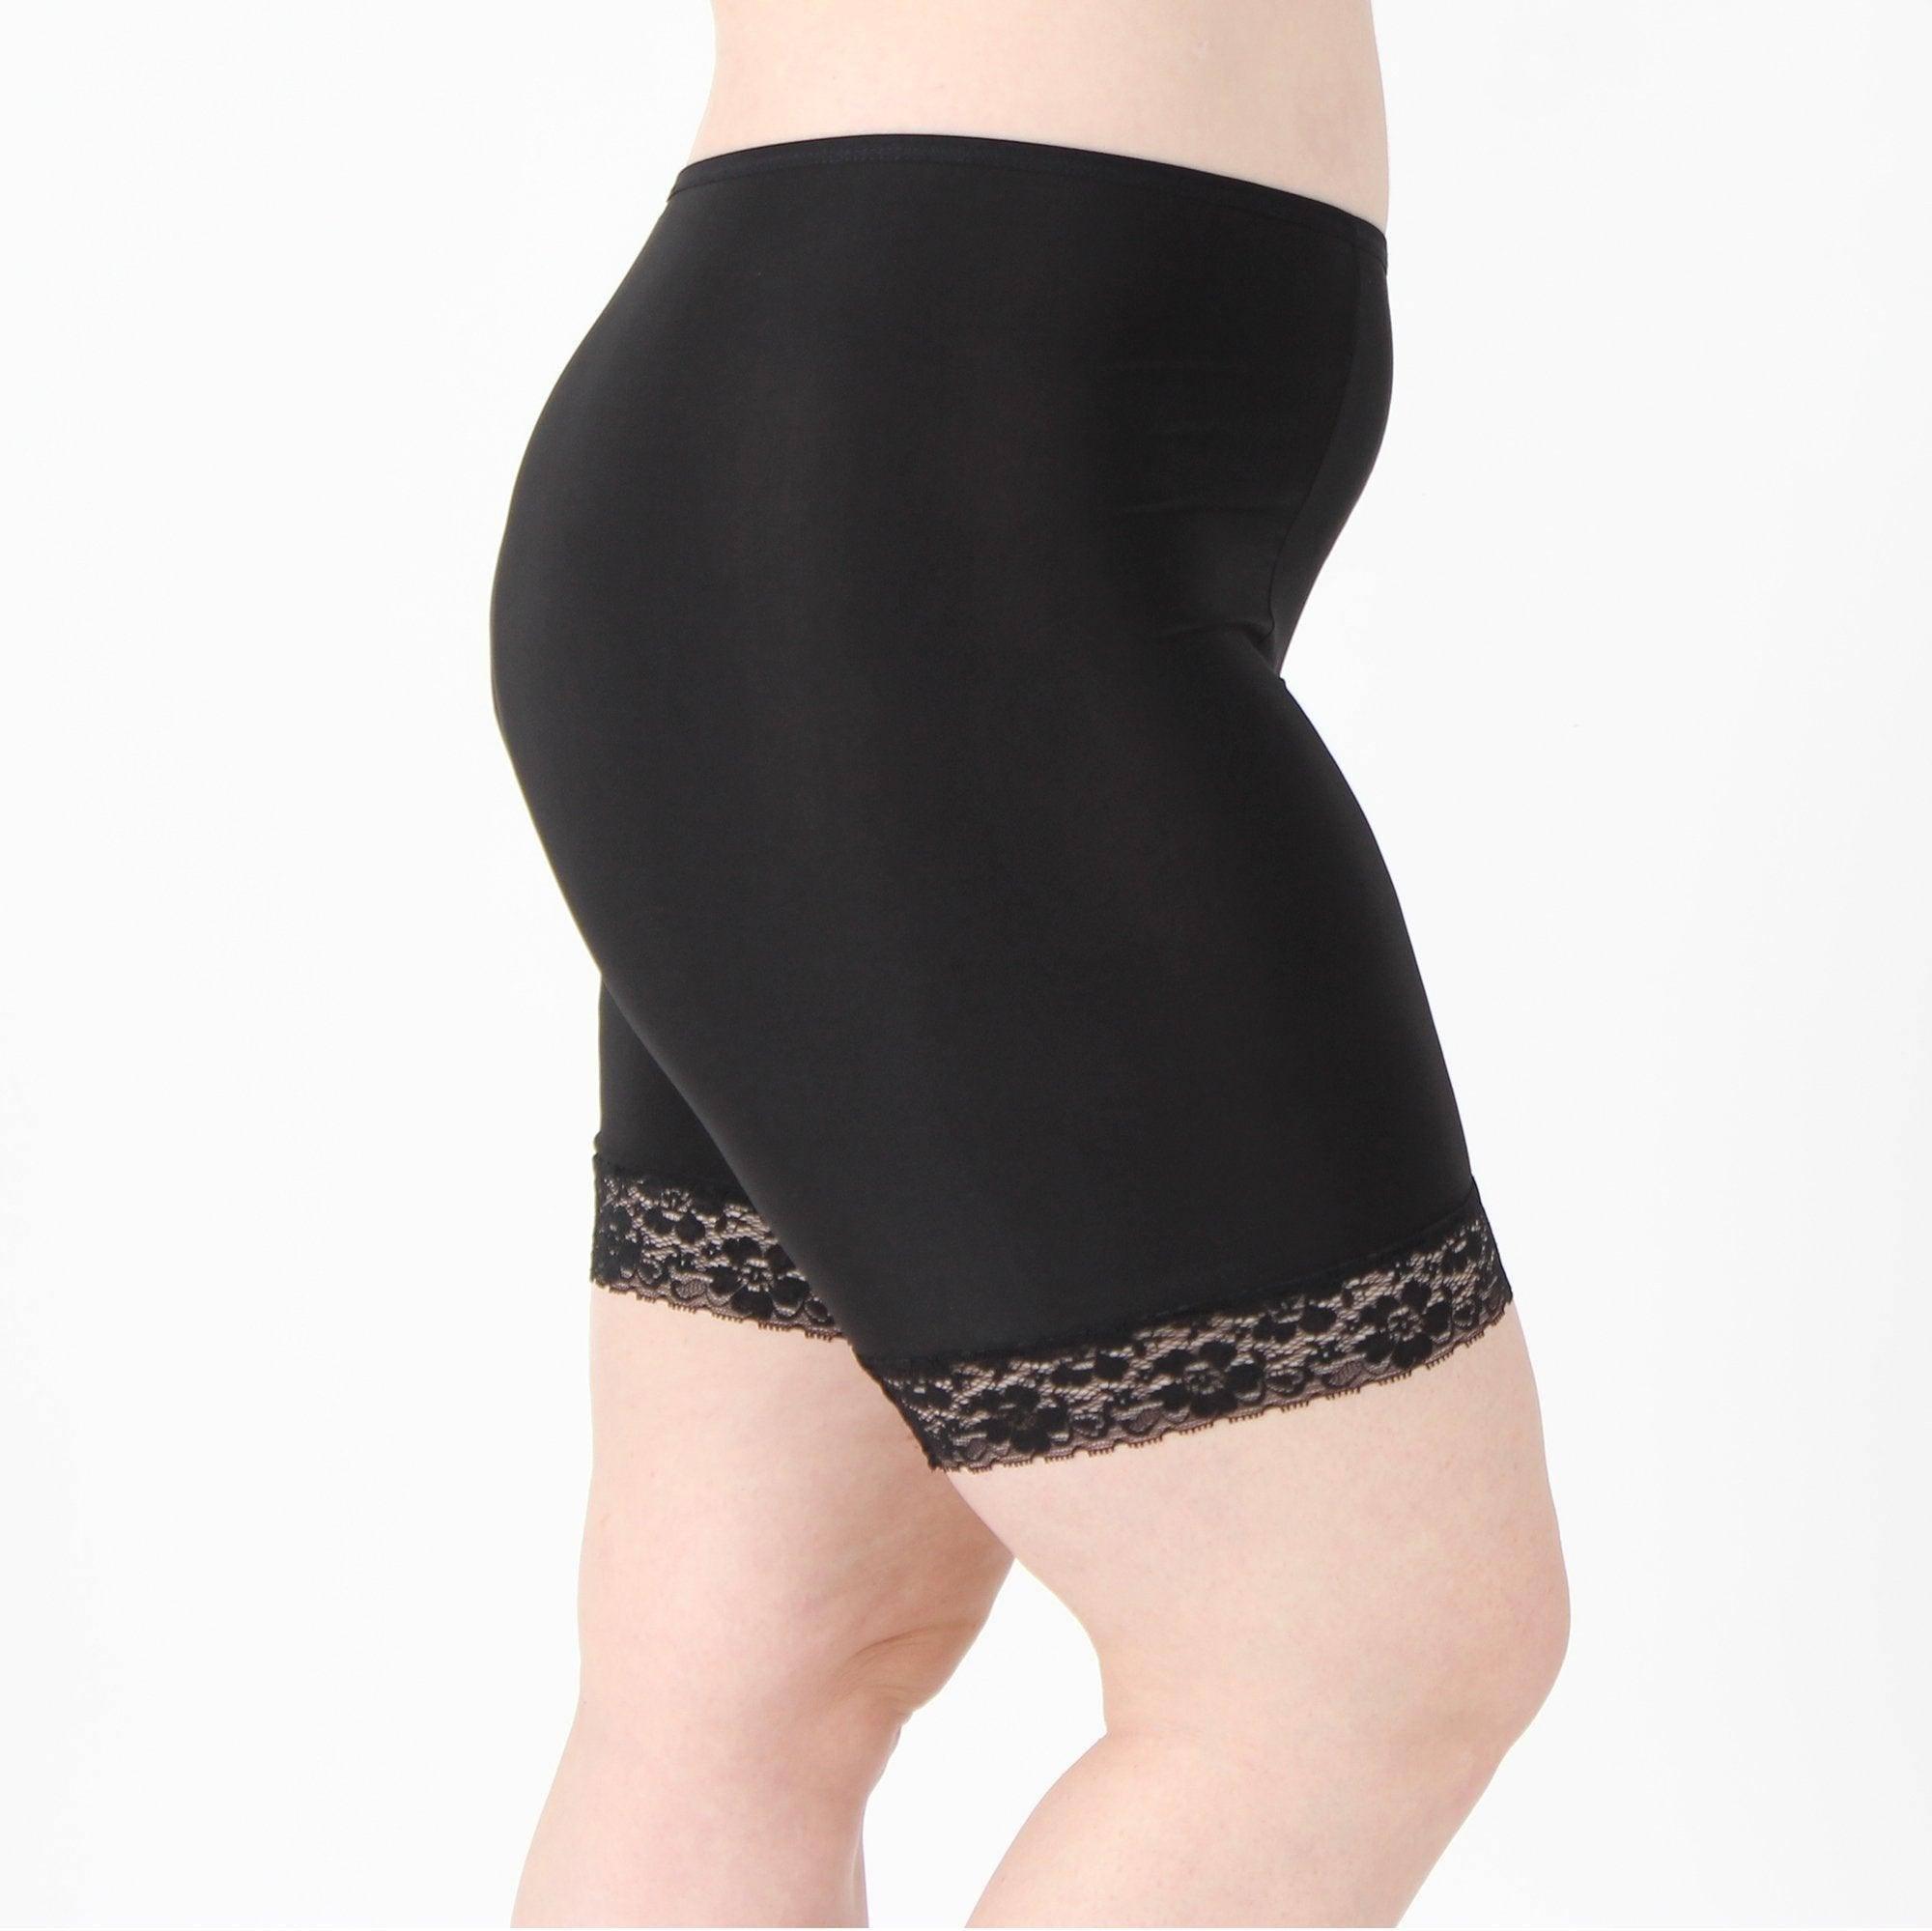 Under Dress Shorts with Pockets  Black Thigh Protection Shorts - 8